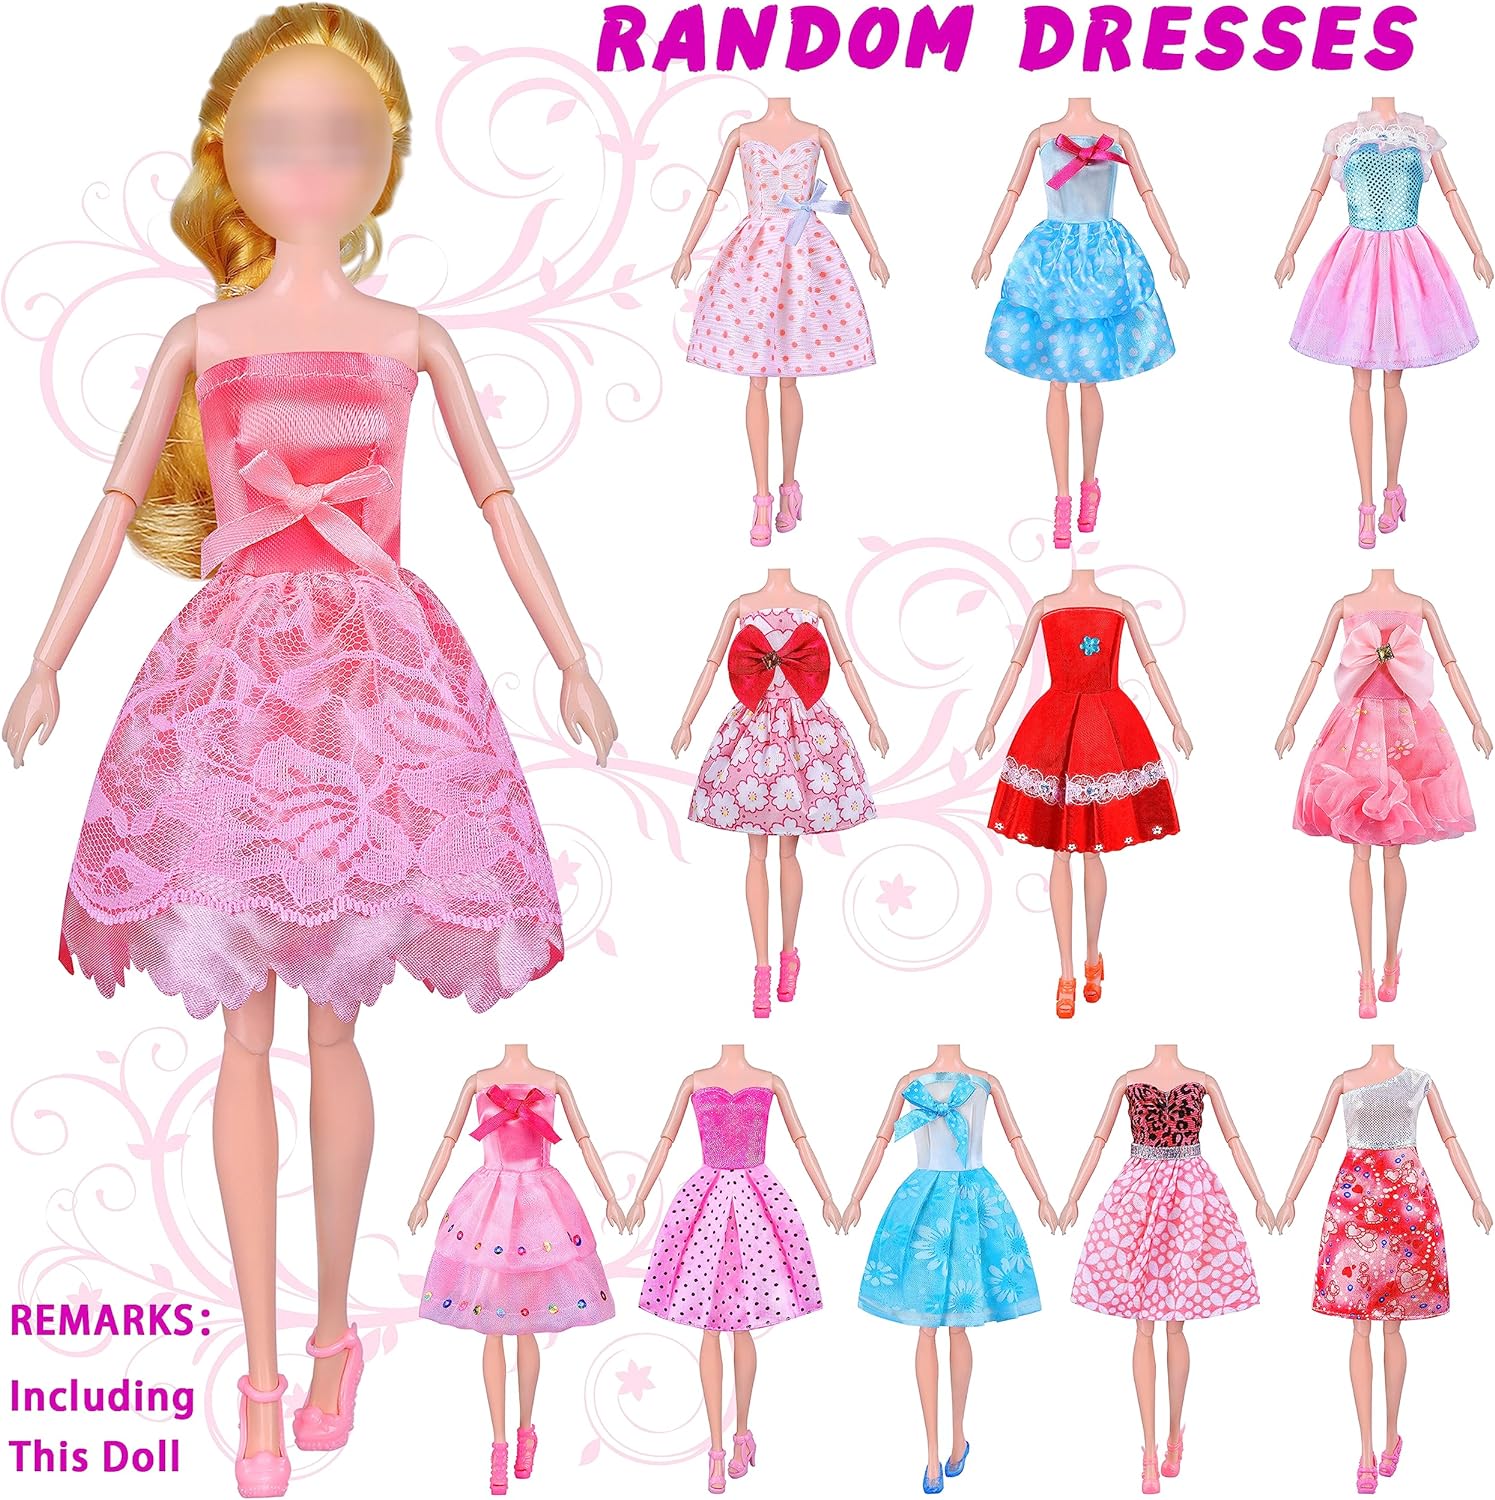 84 Pcs Doll Clothes and Accessories with Doll, Princess Gowns, Fashion Dresses, Slip Dresses, Top & Pants/Jumpsuit, Swimsuits, Shoes, Hangers, Doll Dress up Toys for Girls Kids Toddlers Toy Gifts